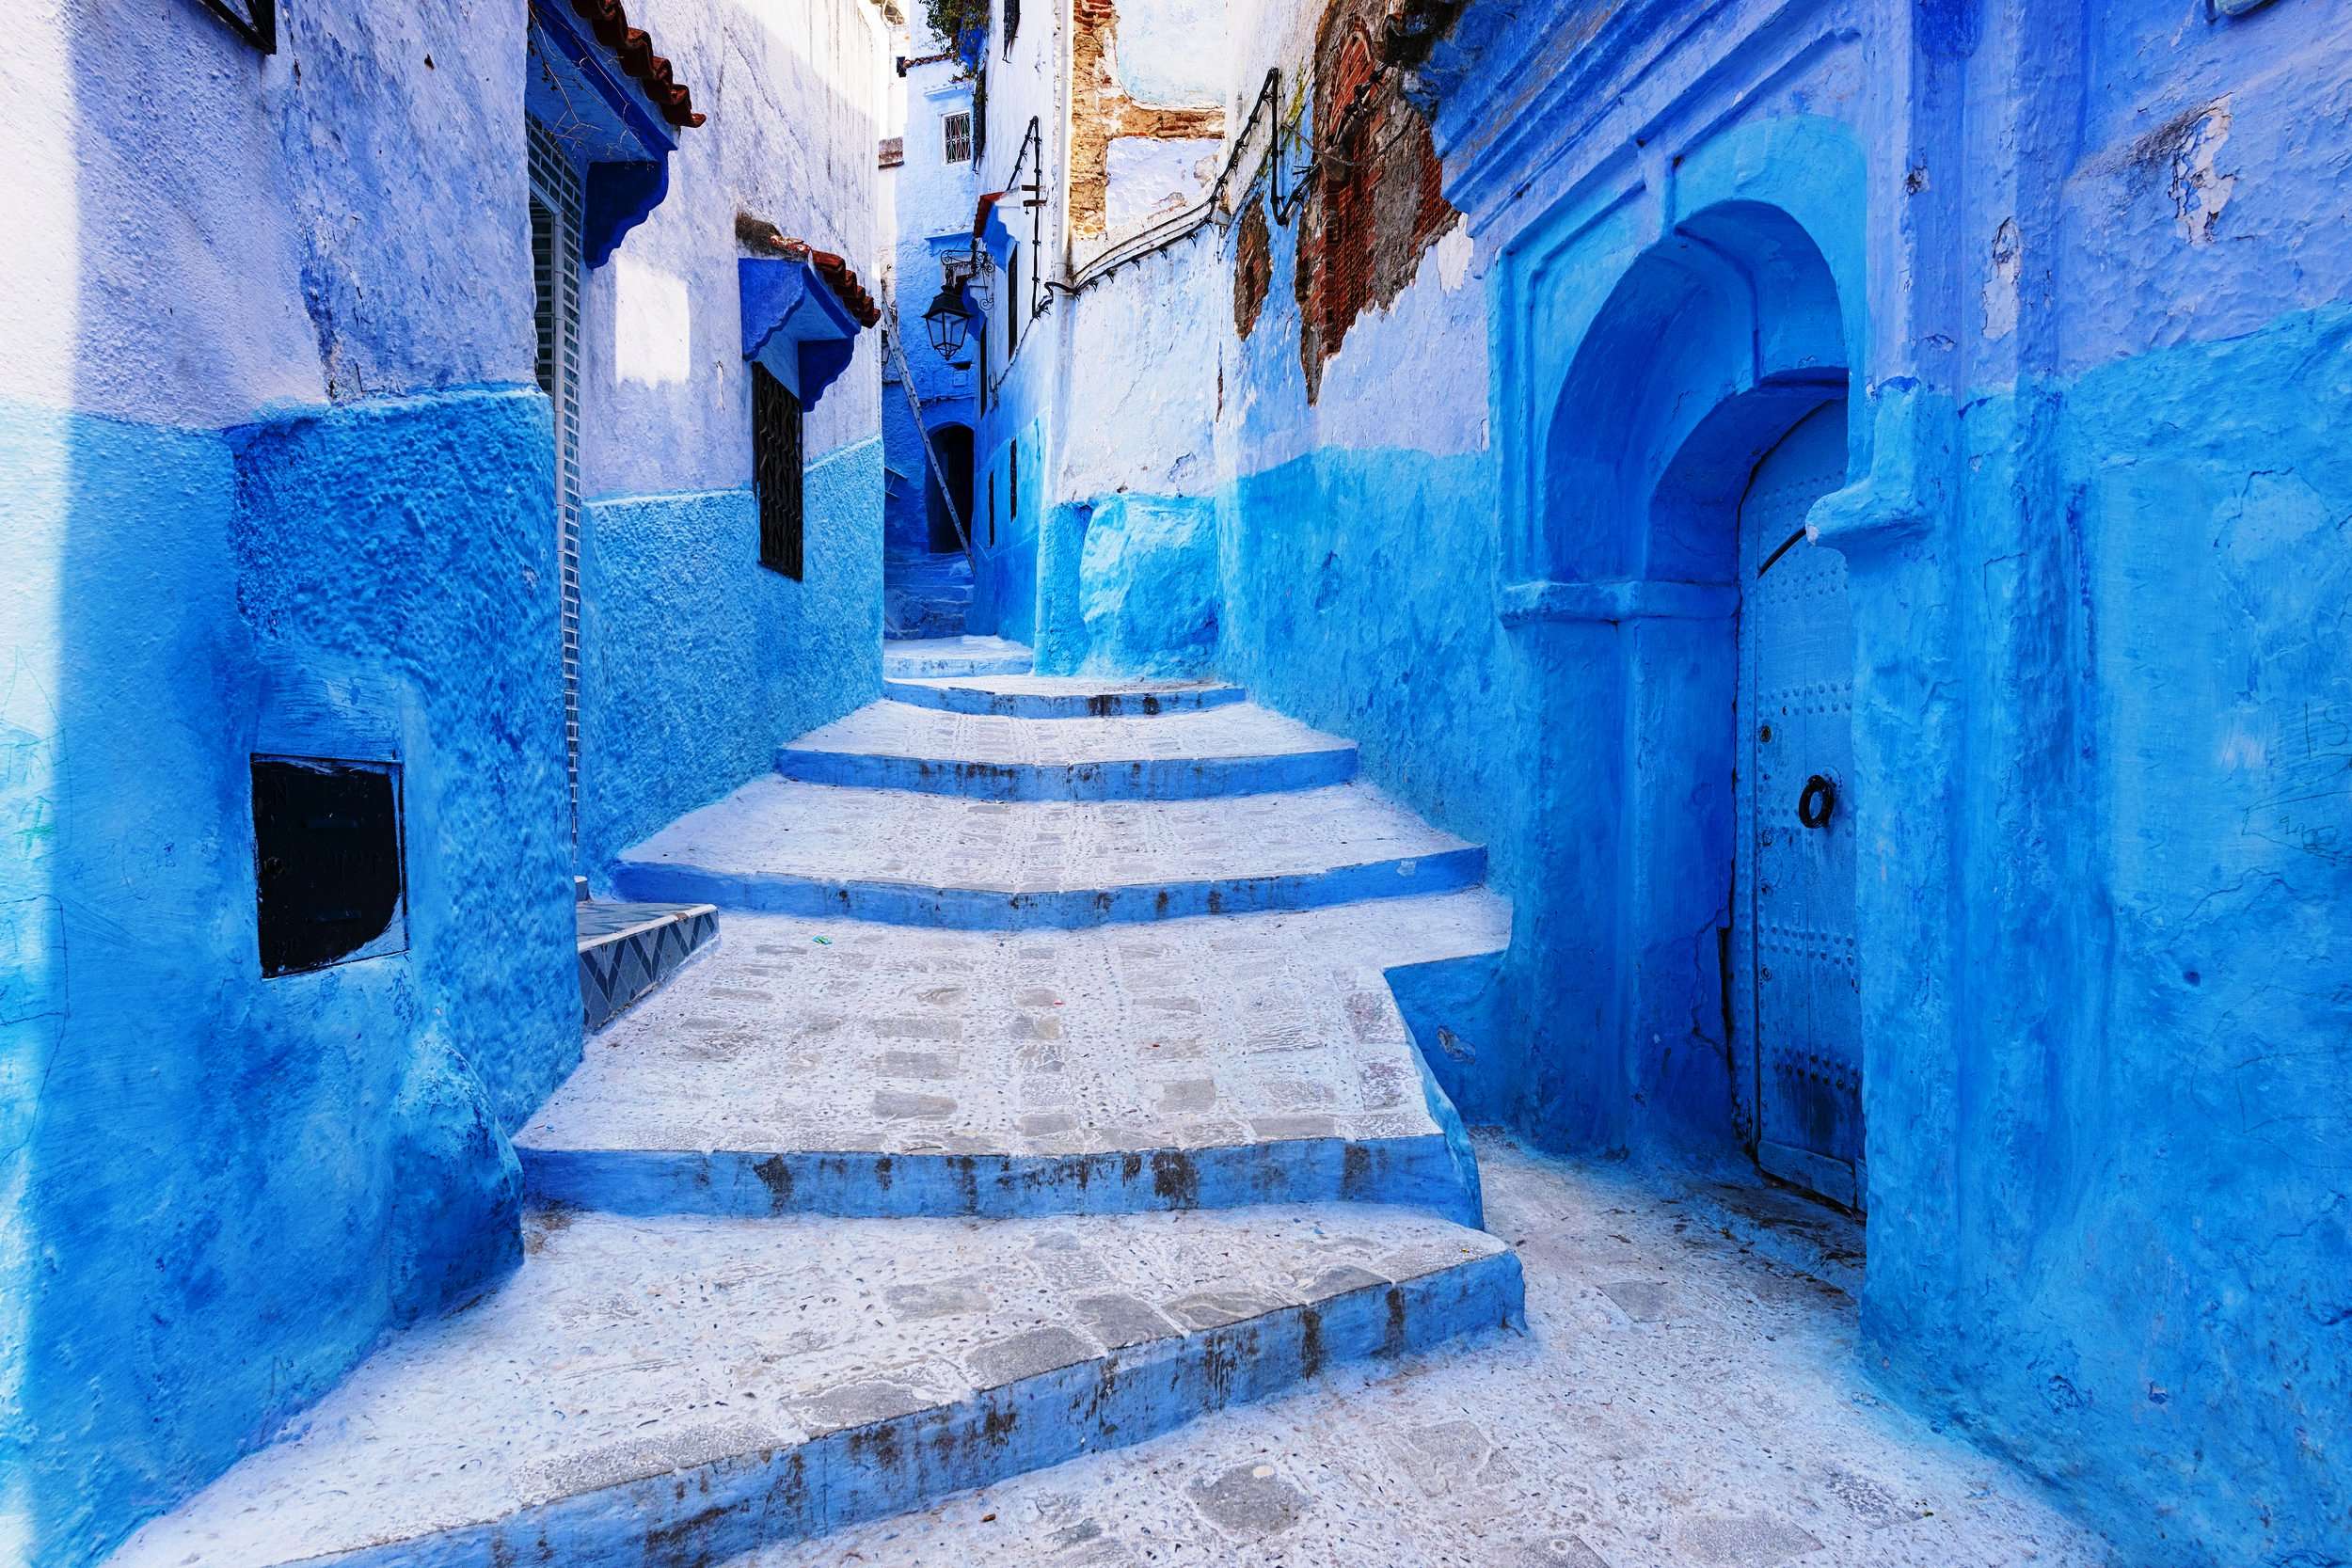 Chefchaouen city guided tours to explore the medina sites of the blue city